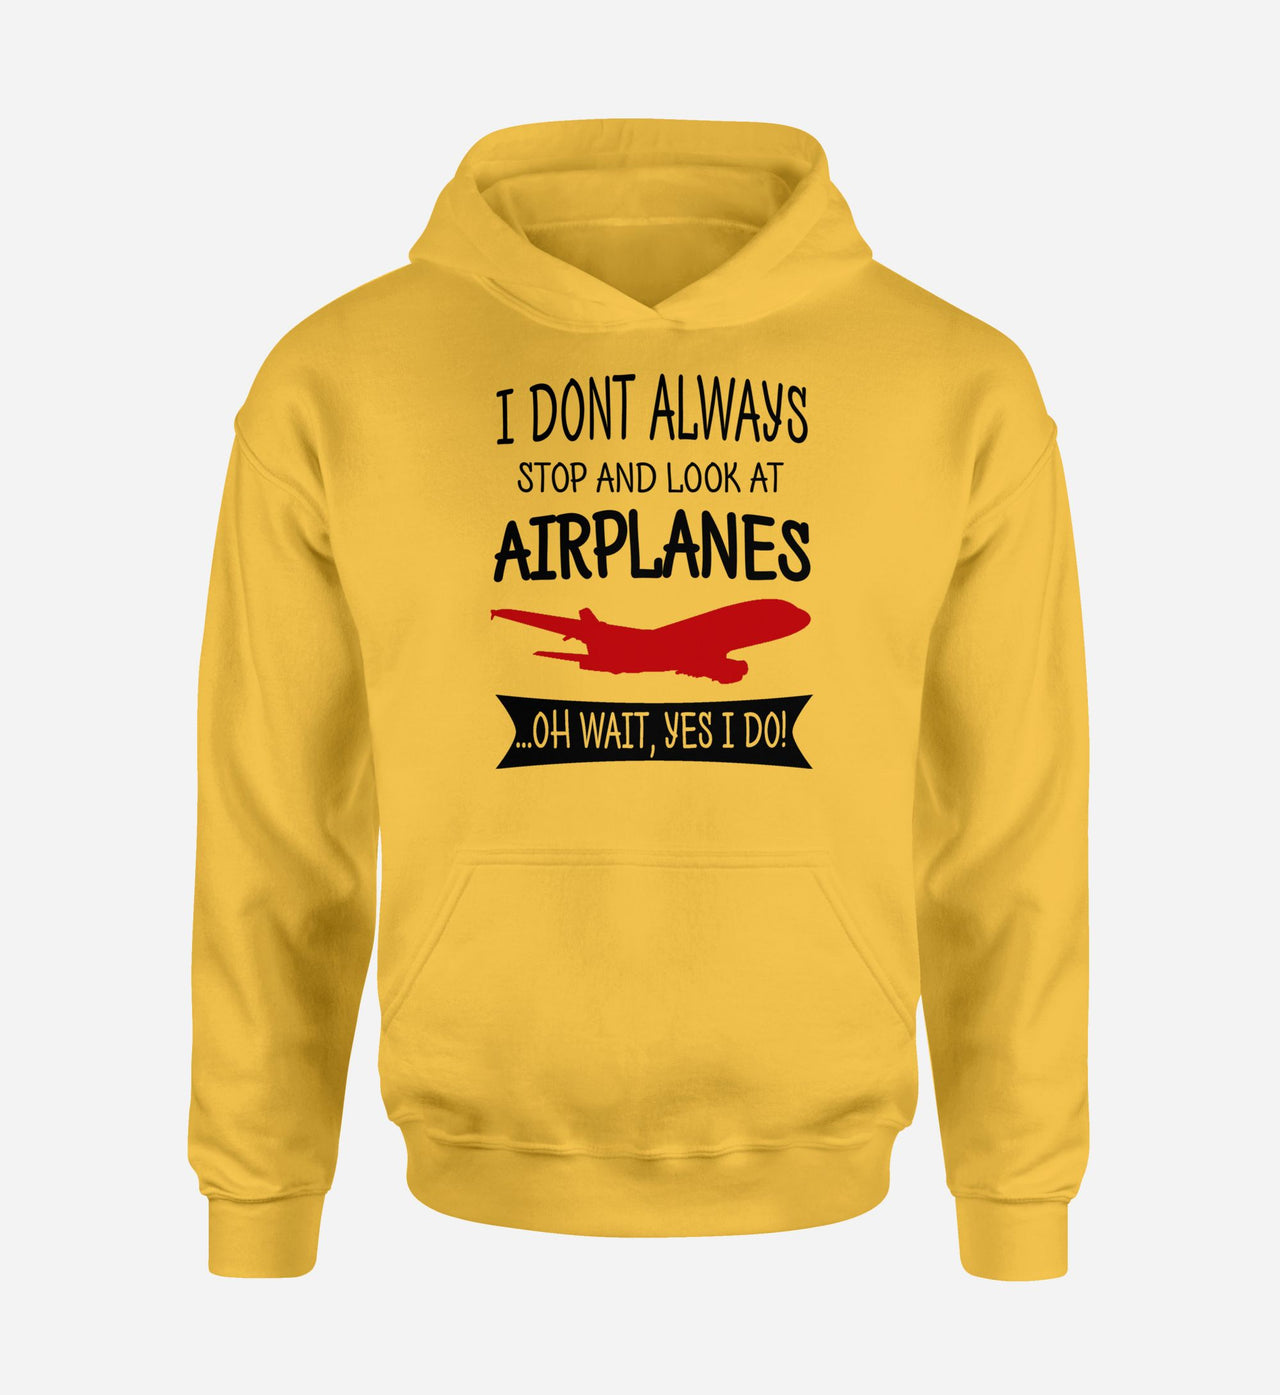 I Don't Always Stop and Look at Airplanes Designed Hoodies